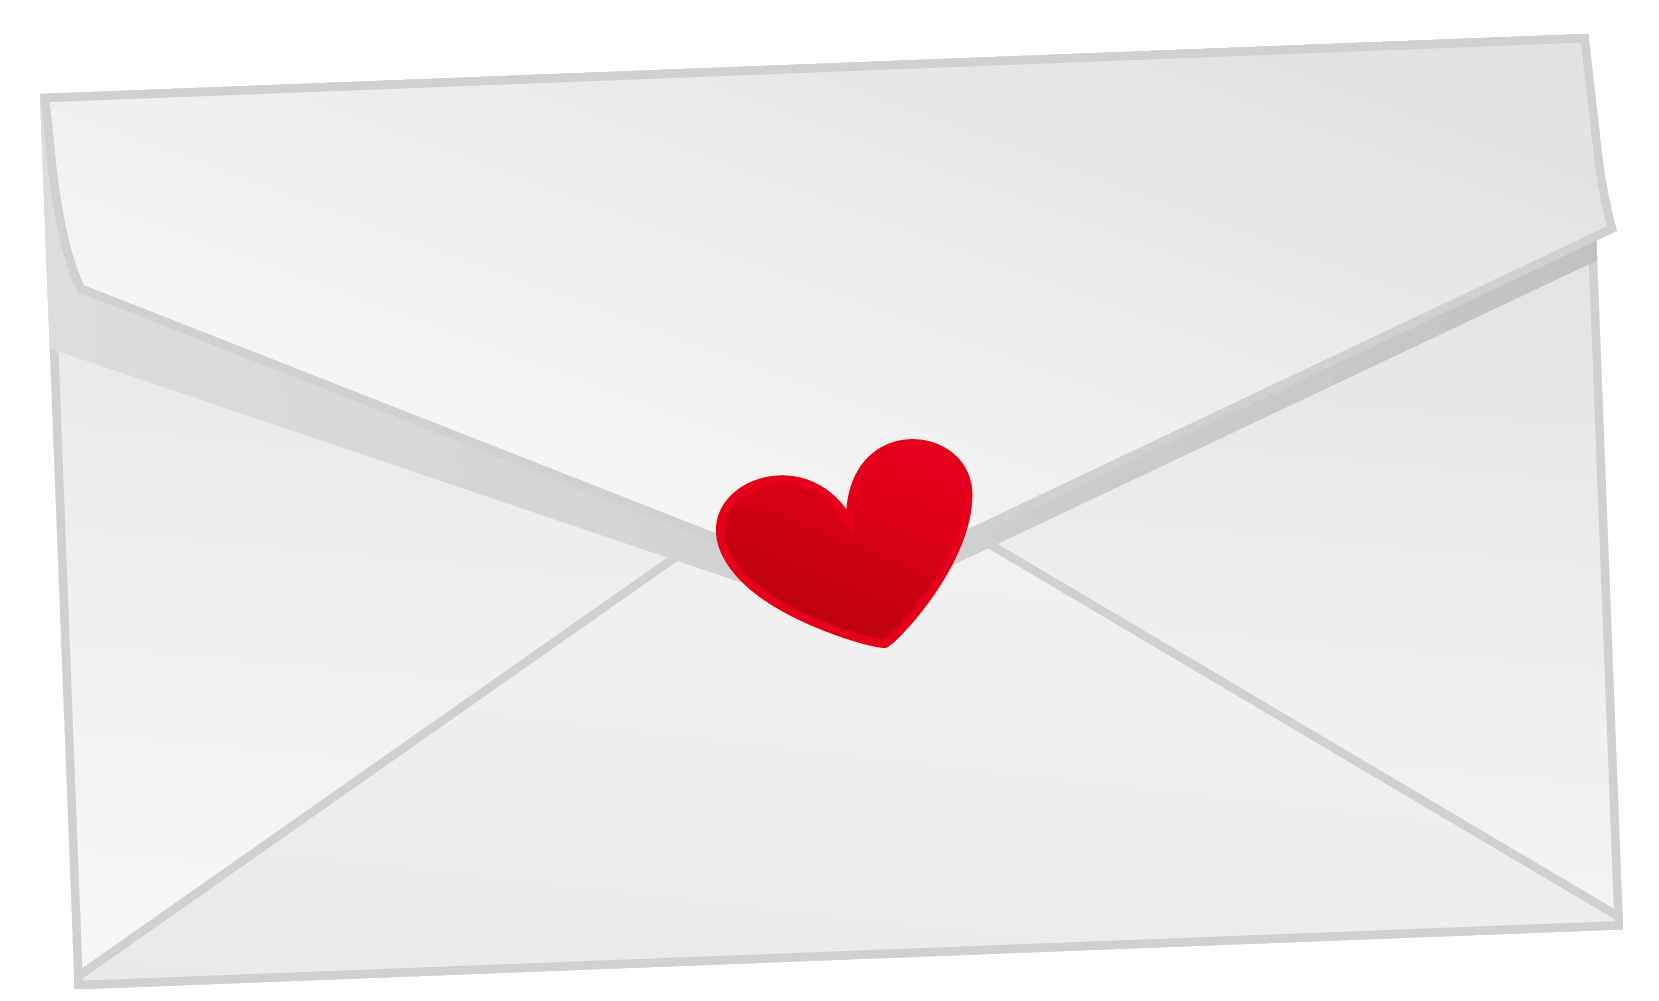 email clipart latter